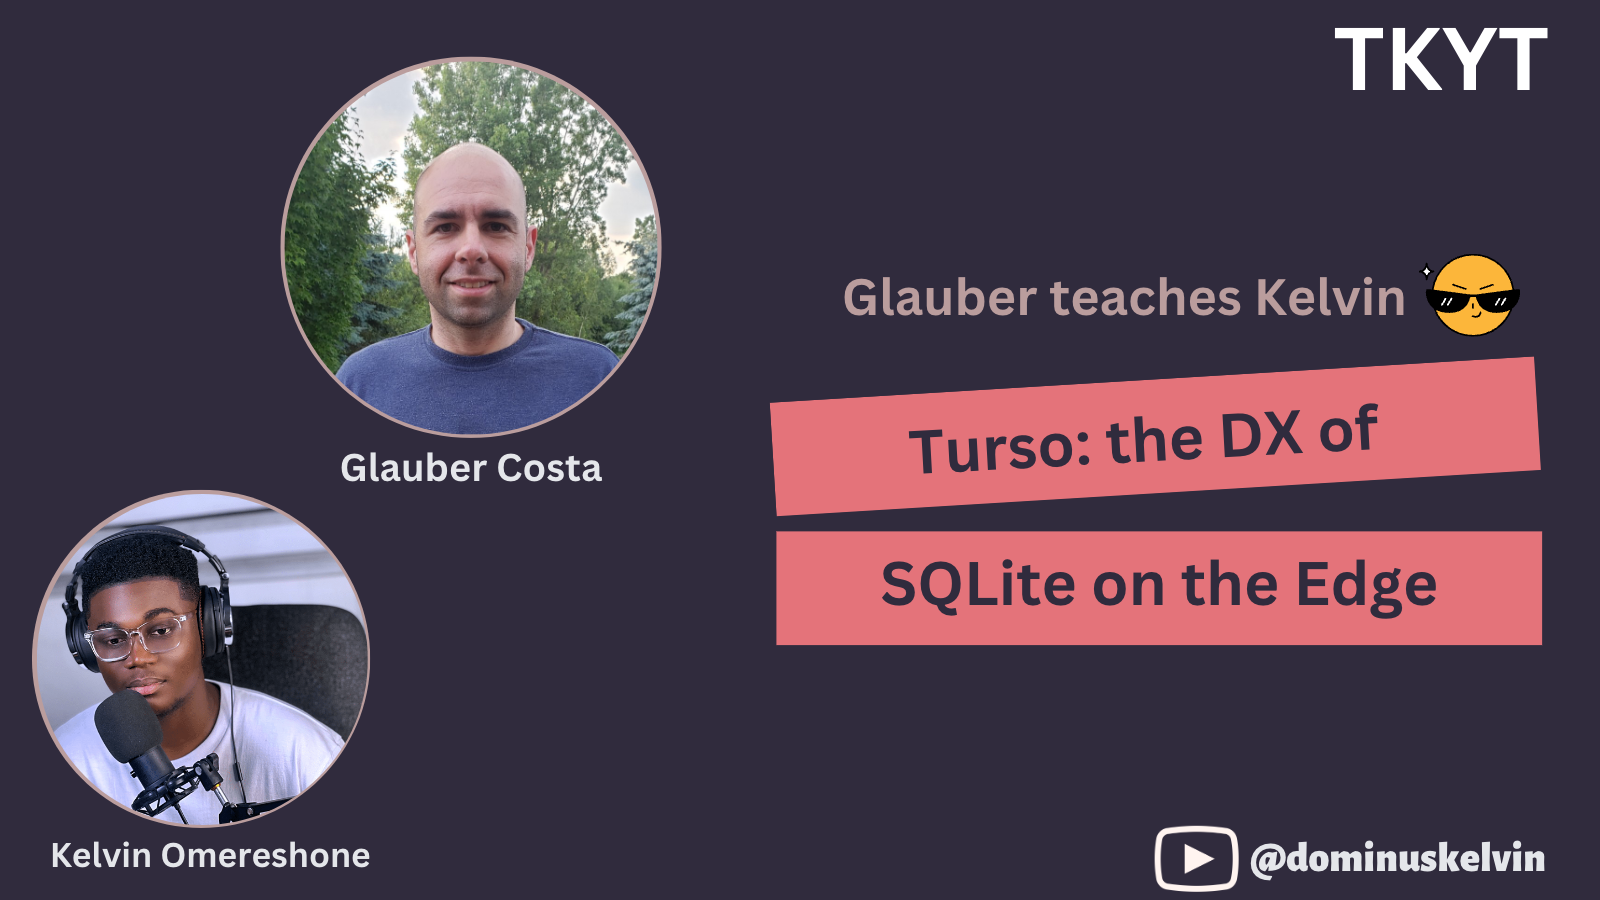 Turso: the DX of SQLite on the Edge